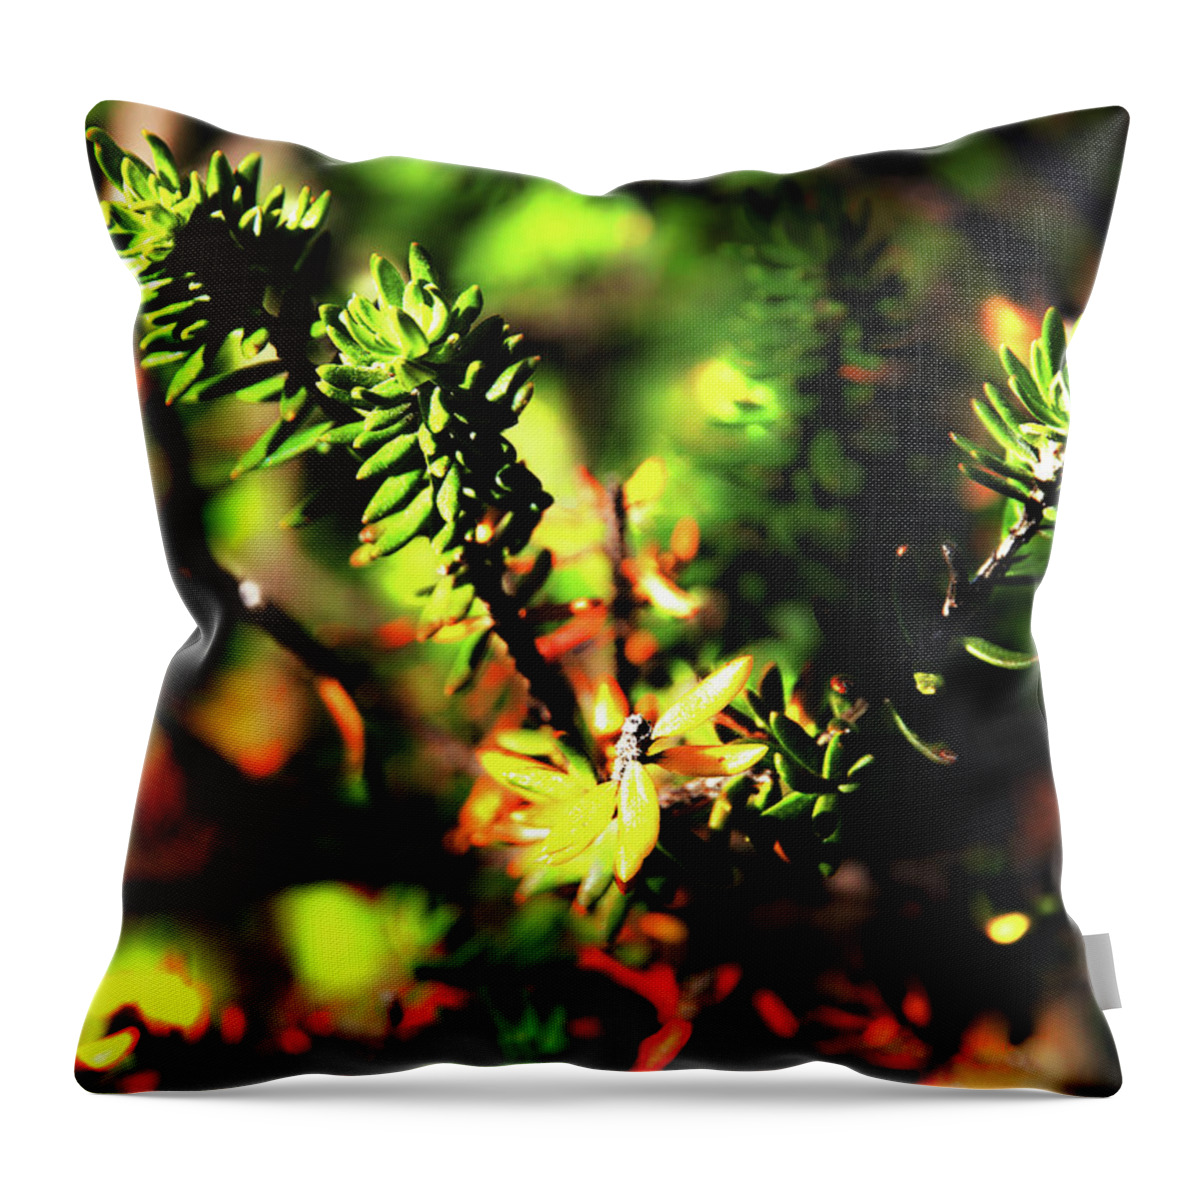 Westringia Fruticosa Throw Pillow featuring the photograph When Yellow Leaves Are Falling by Miroslava Jurcik